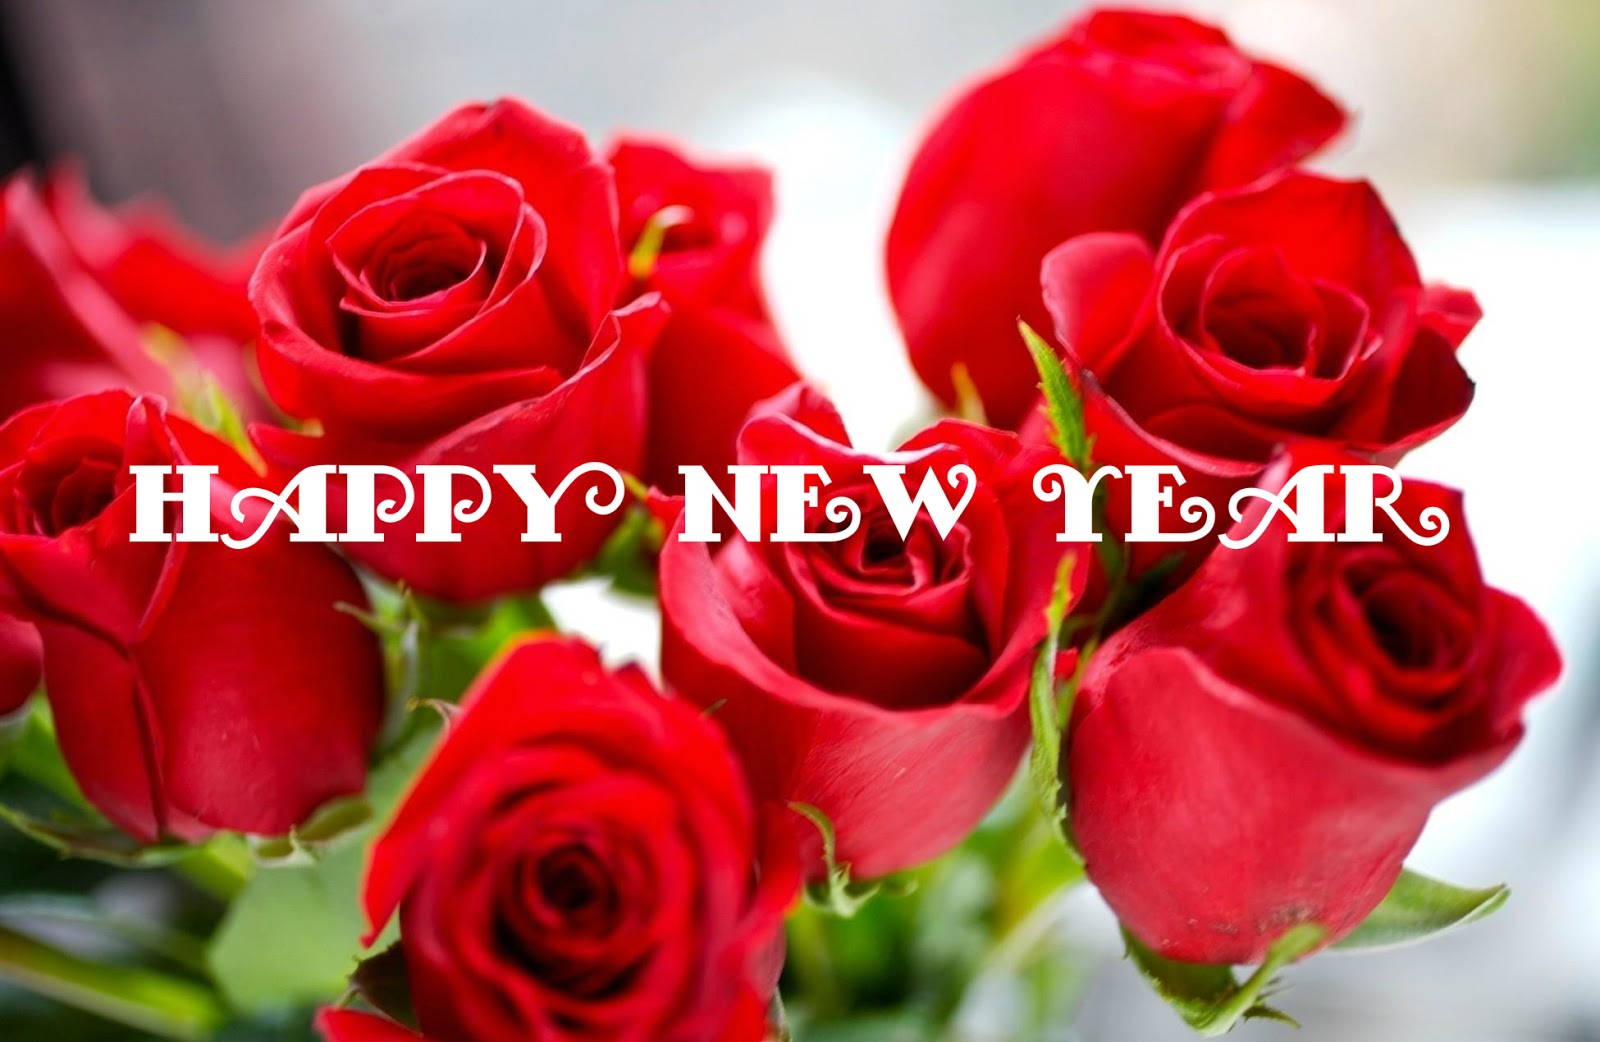 🔥 [51+] Happy New Year With Flowers Wallpapers WallpaperSafari